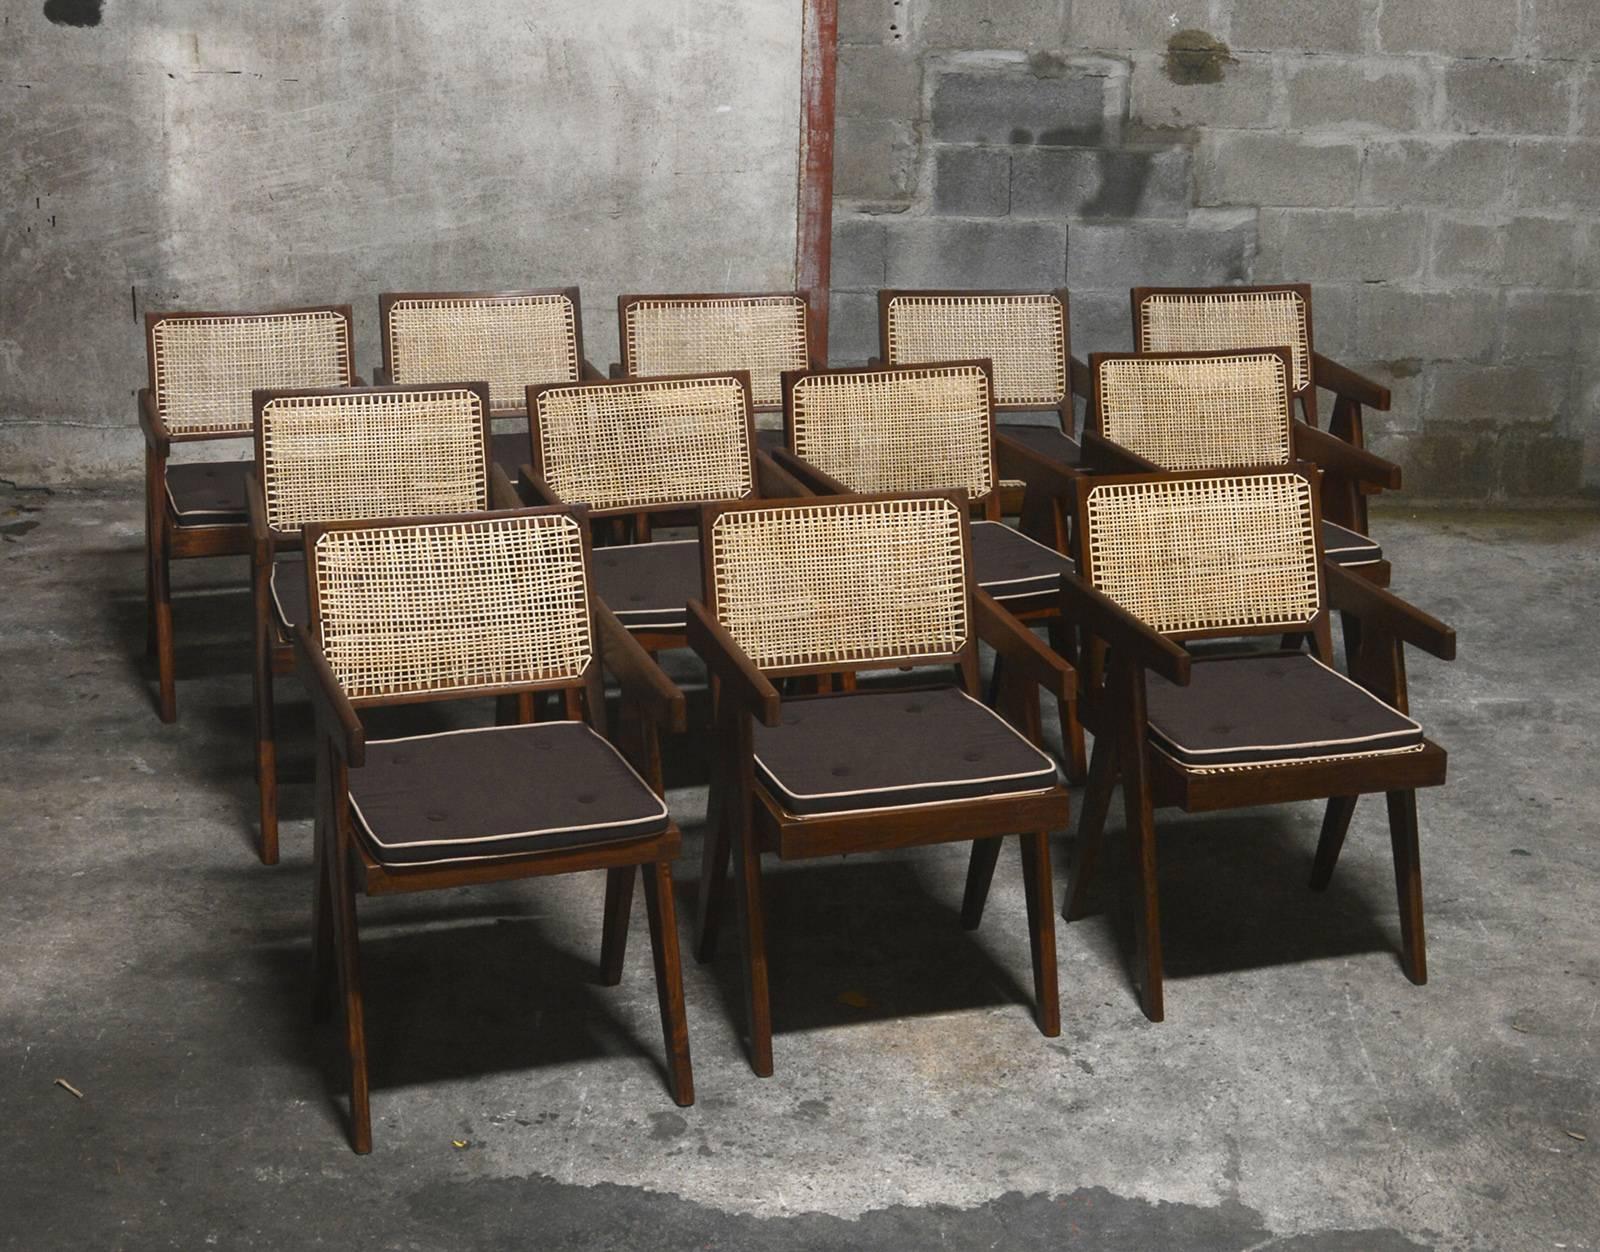 Pierre Jeanneret, very rare set of 12 cane and teak wood office armchairs from administrative buildings in Chandigarh, India. Back attached to the seat. Teak, woven cane and upholstered seat cushion featuring cloth covering. See photo before